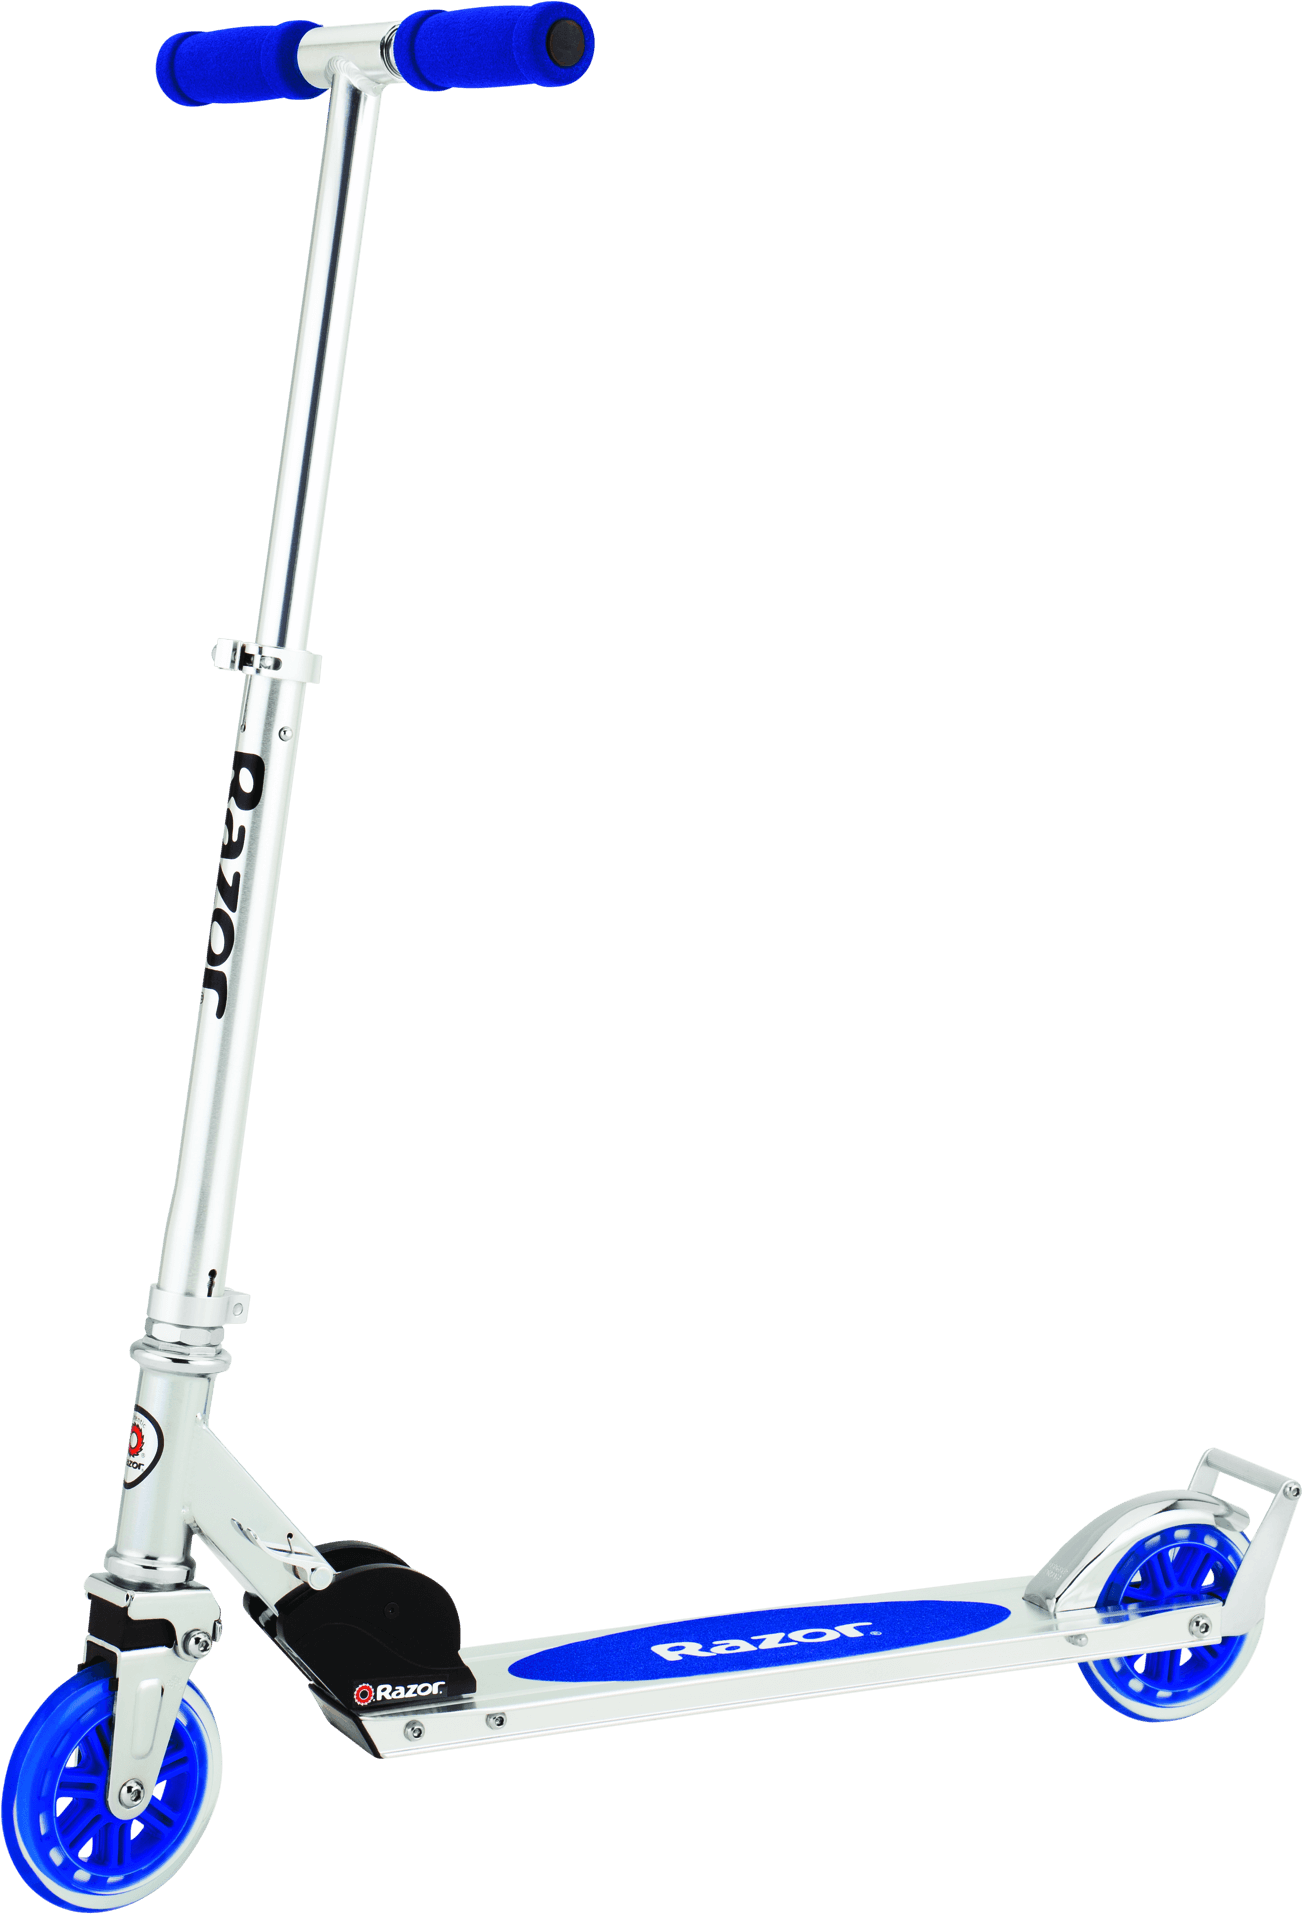 Blueand White Kick Scooter PNG image